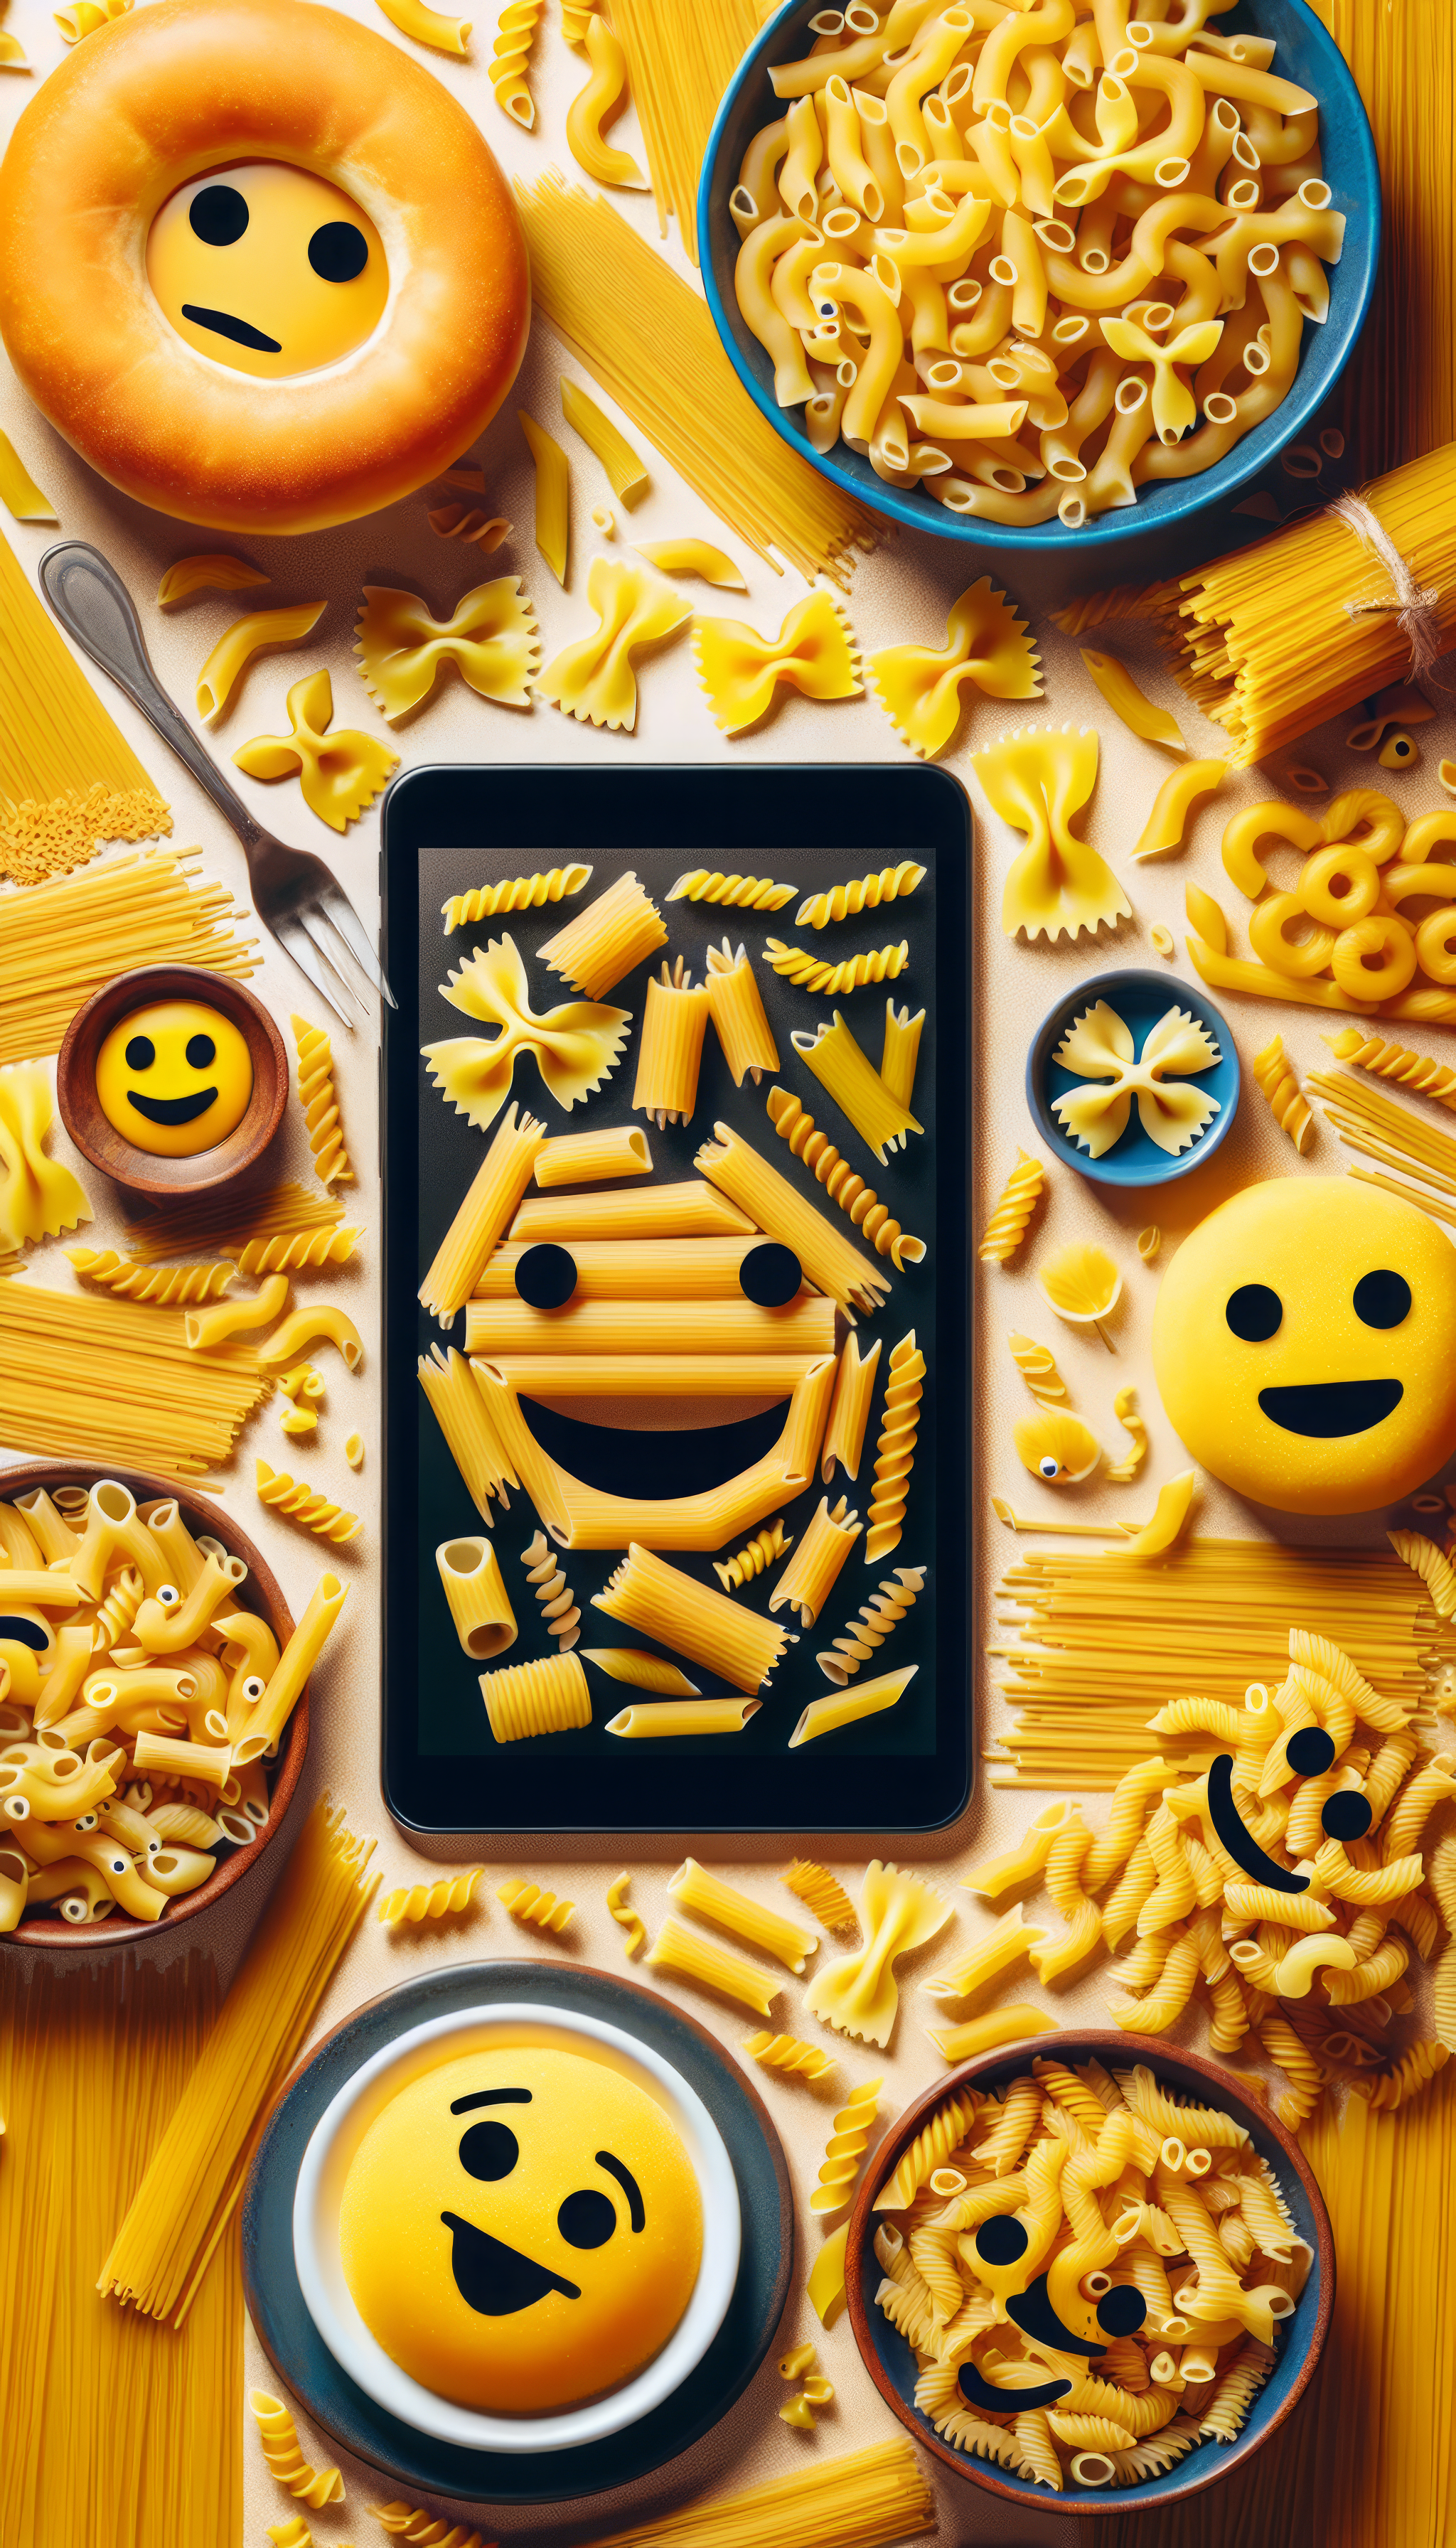 Creative pasta-themed phone wallpaper featuring an assortment of pasta shapes with smiling emoji faces on a vibrant yellow background.